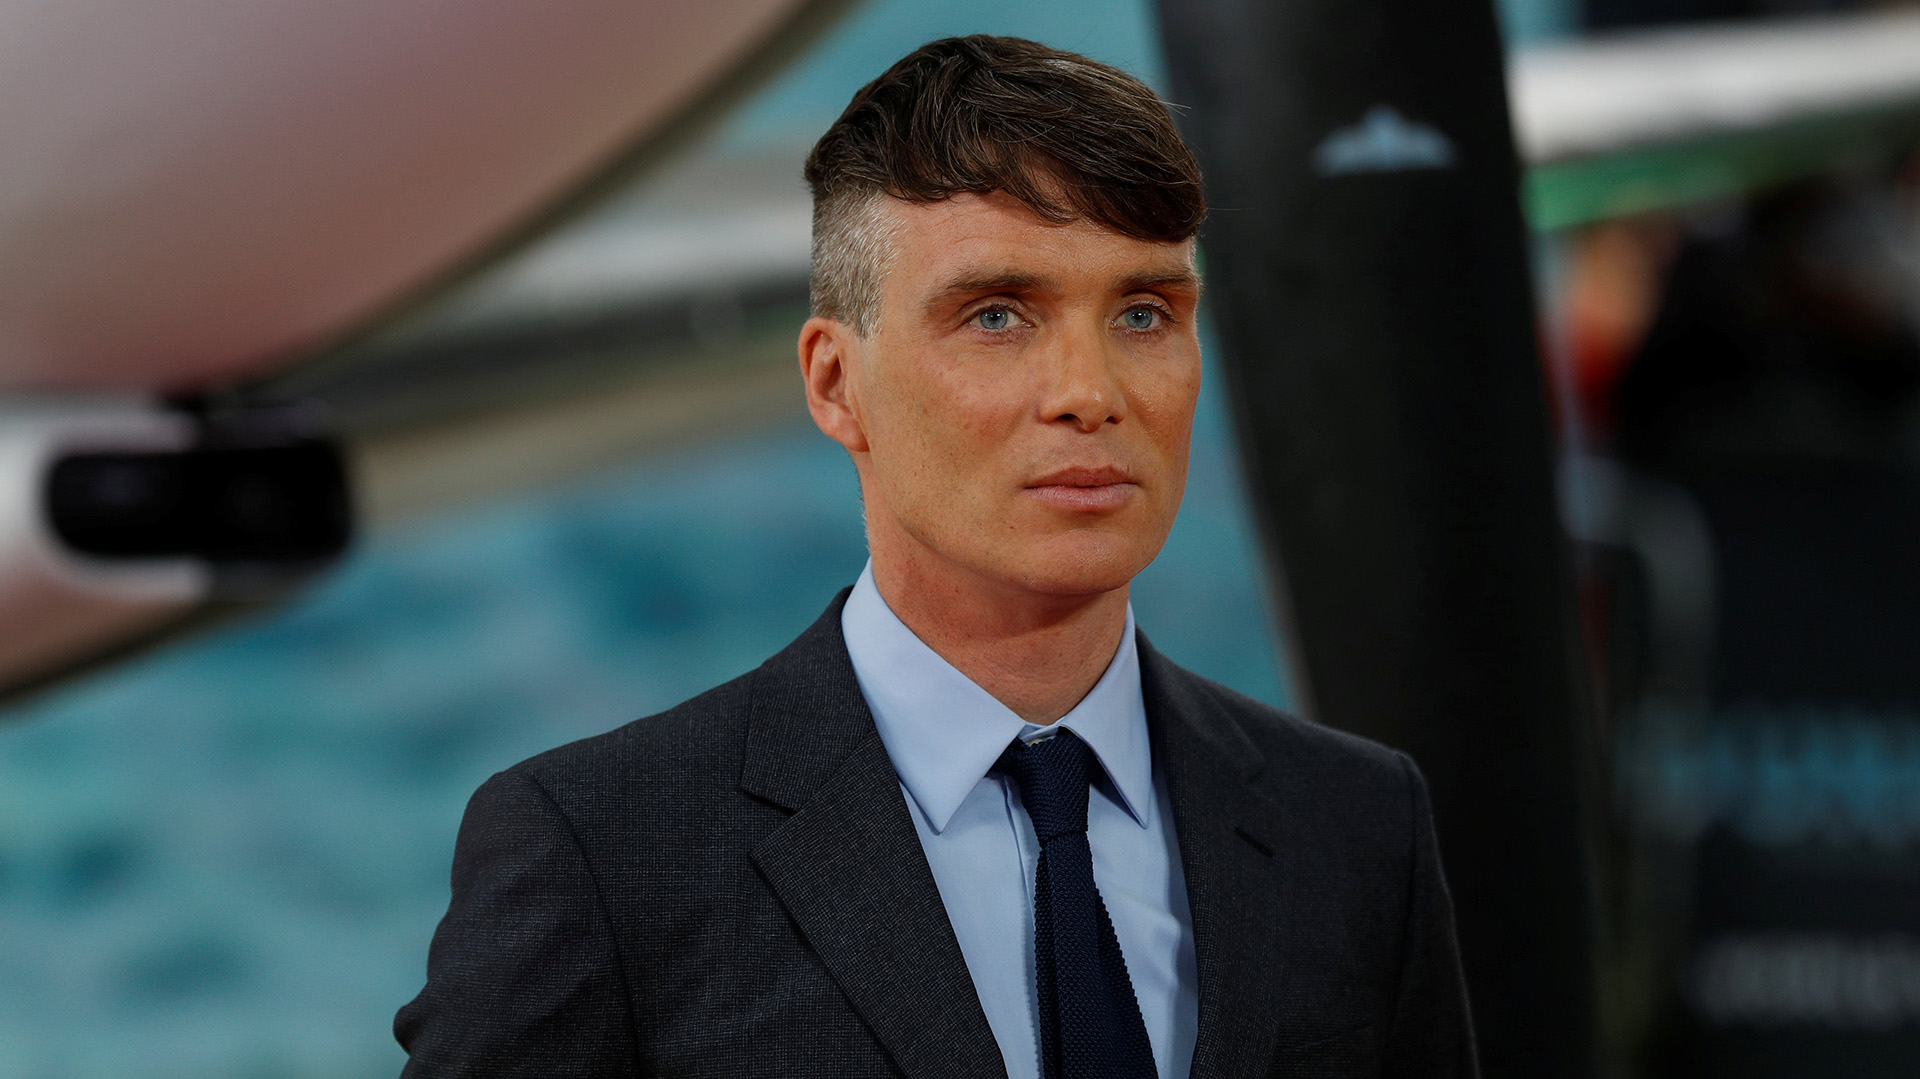 Actor Cillian Murphy arrives for the world premiere of Dunkirk in London, Britain, July 13, 2017.  REUTERS/Peter Nicholls